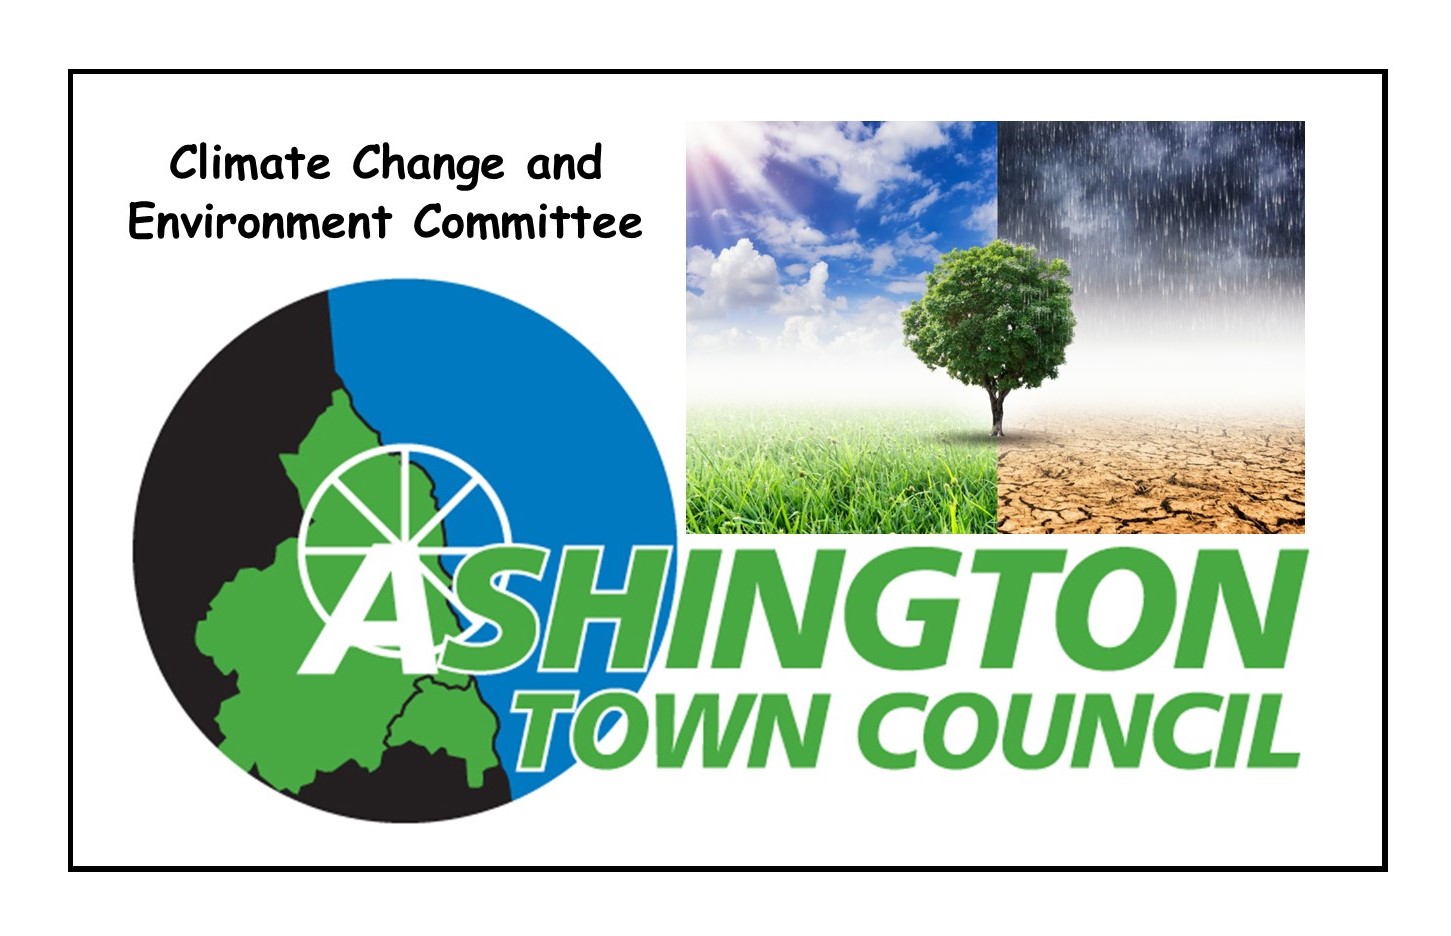 Climate Change is at the top of the agenda for Ashington Town Council